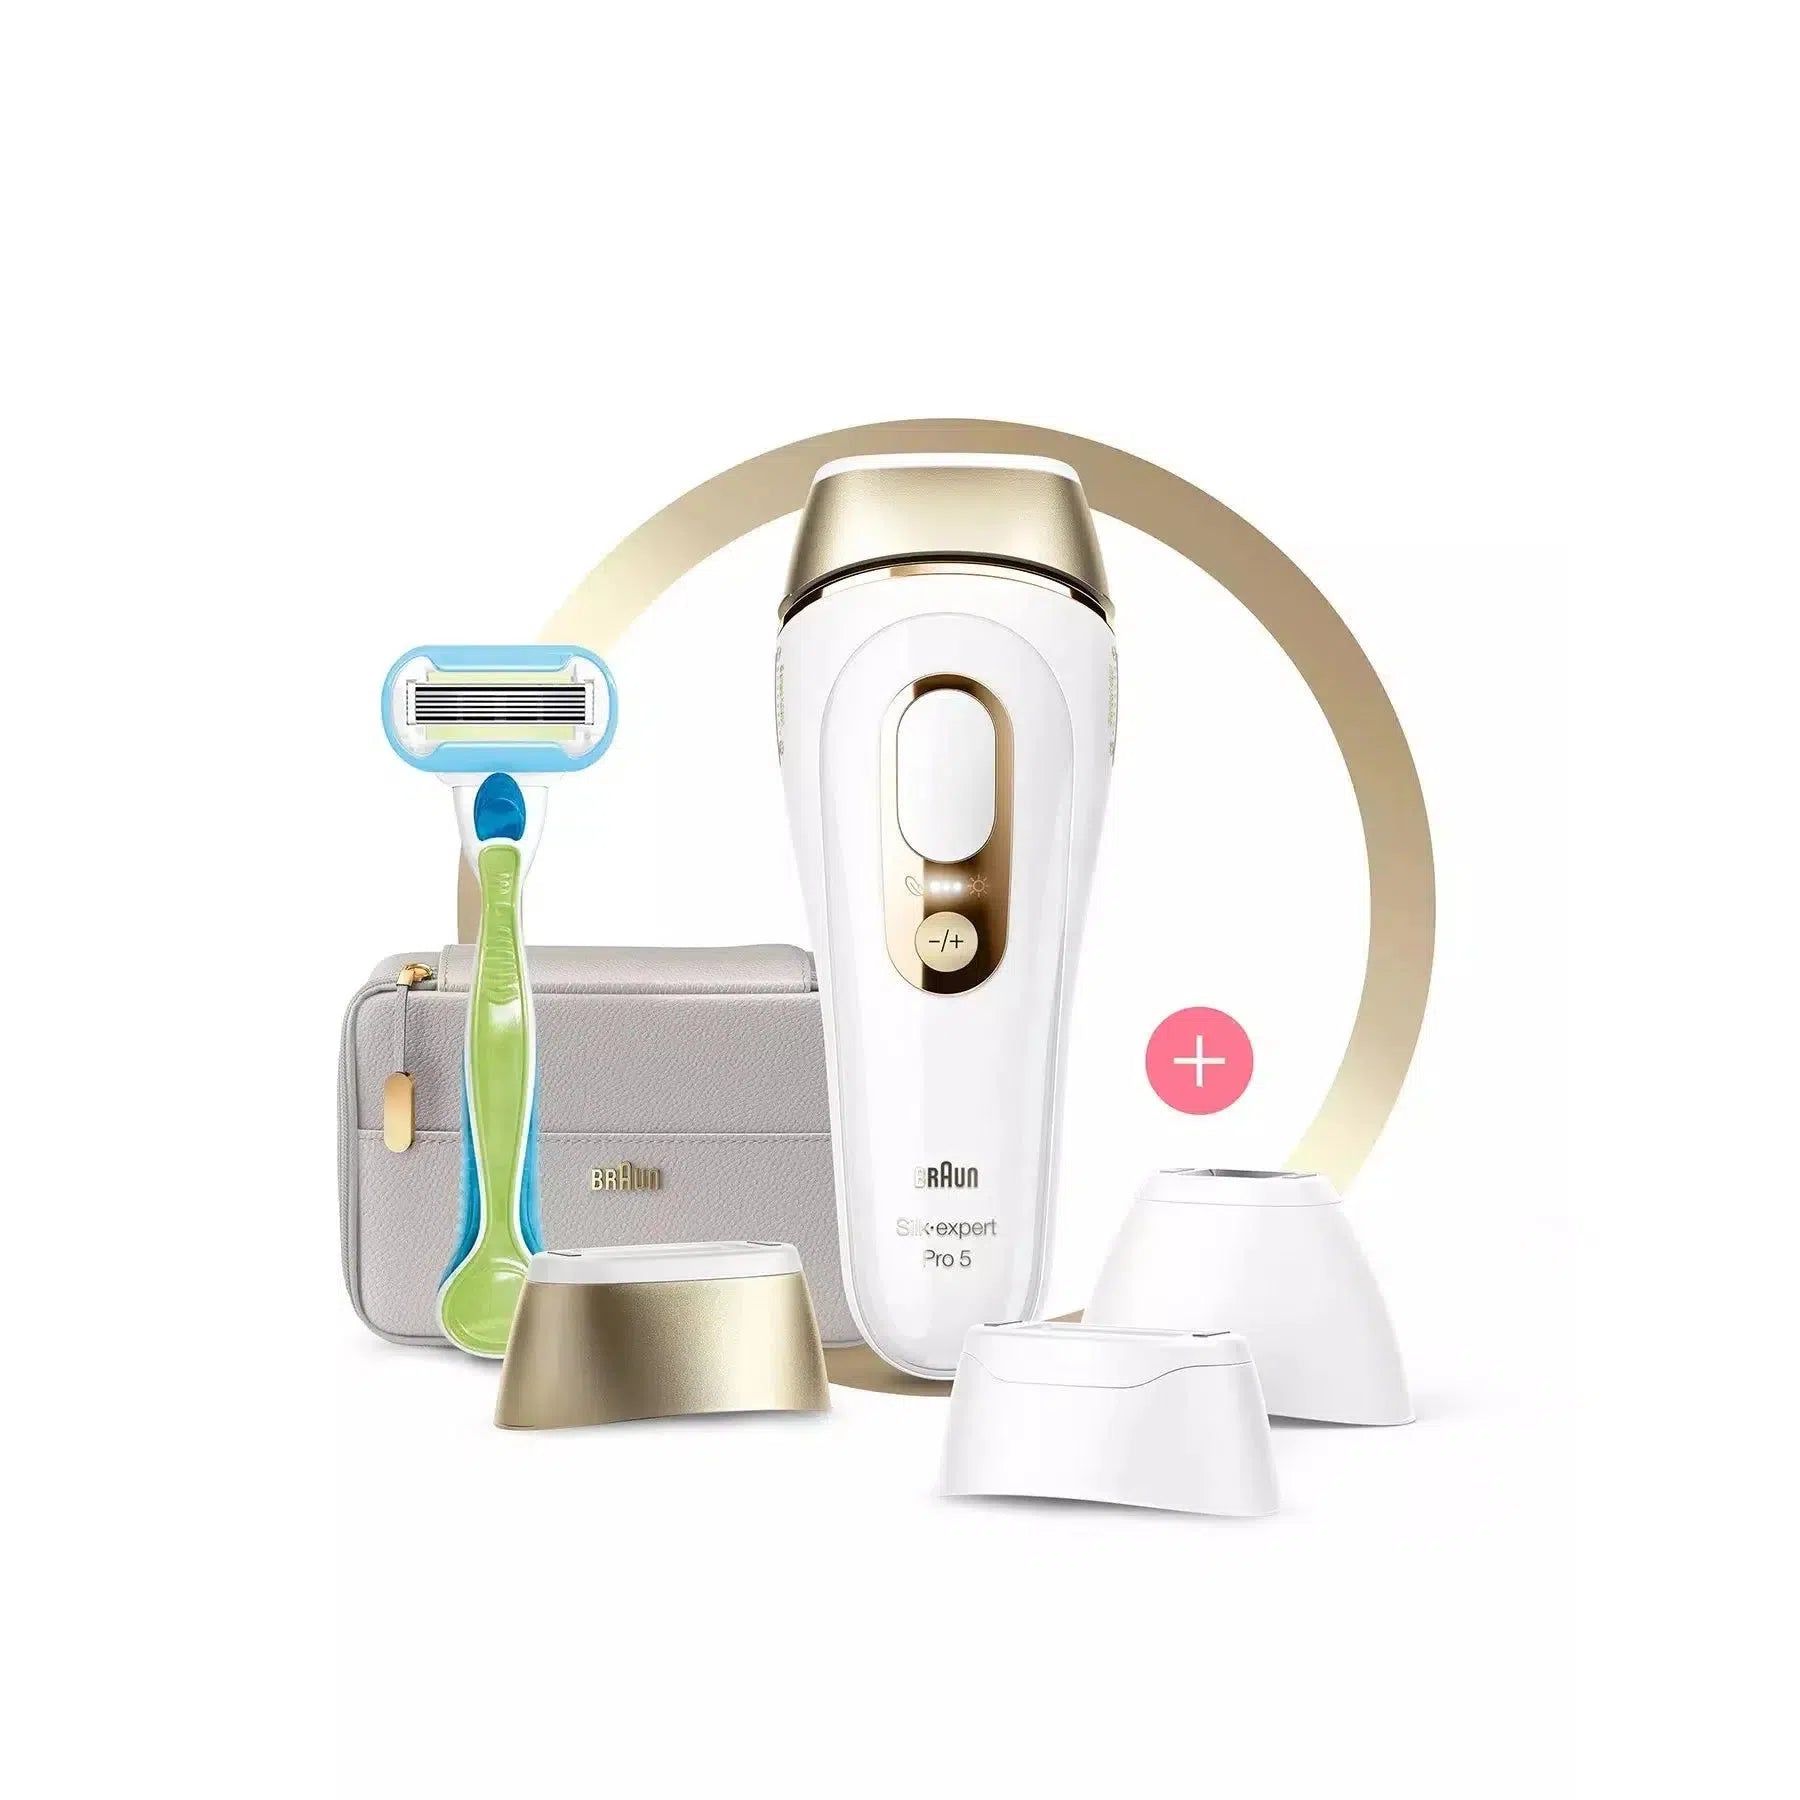 Braun Silk-expert Pro 5 PL5257 System Hair precision Removal IPL with